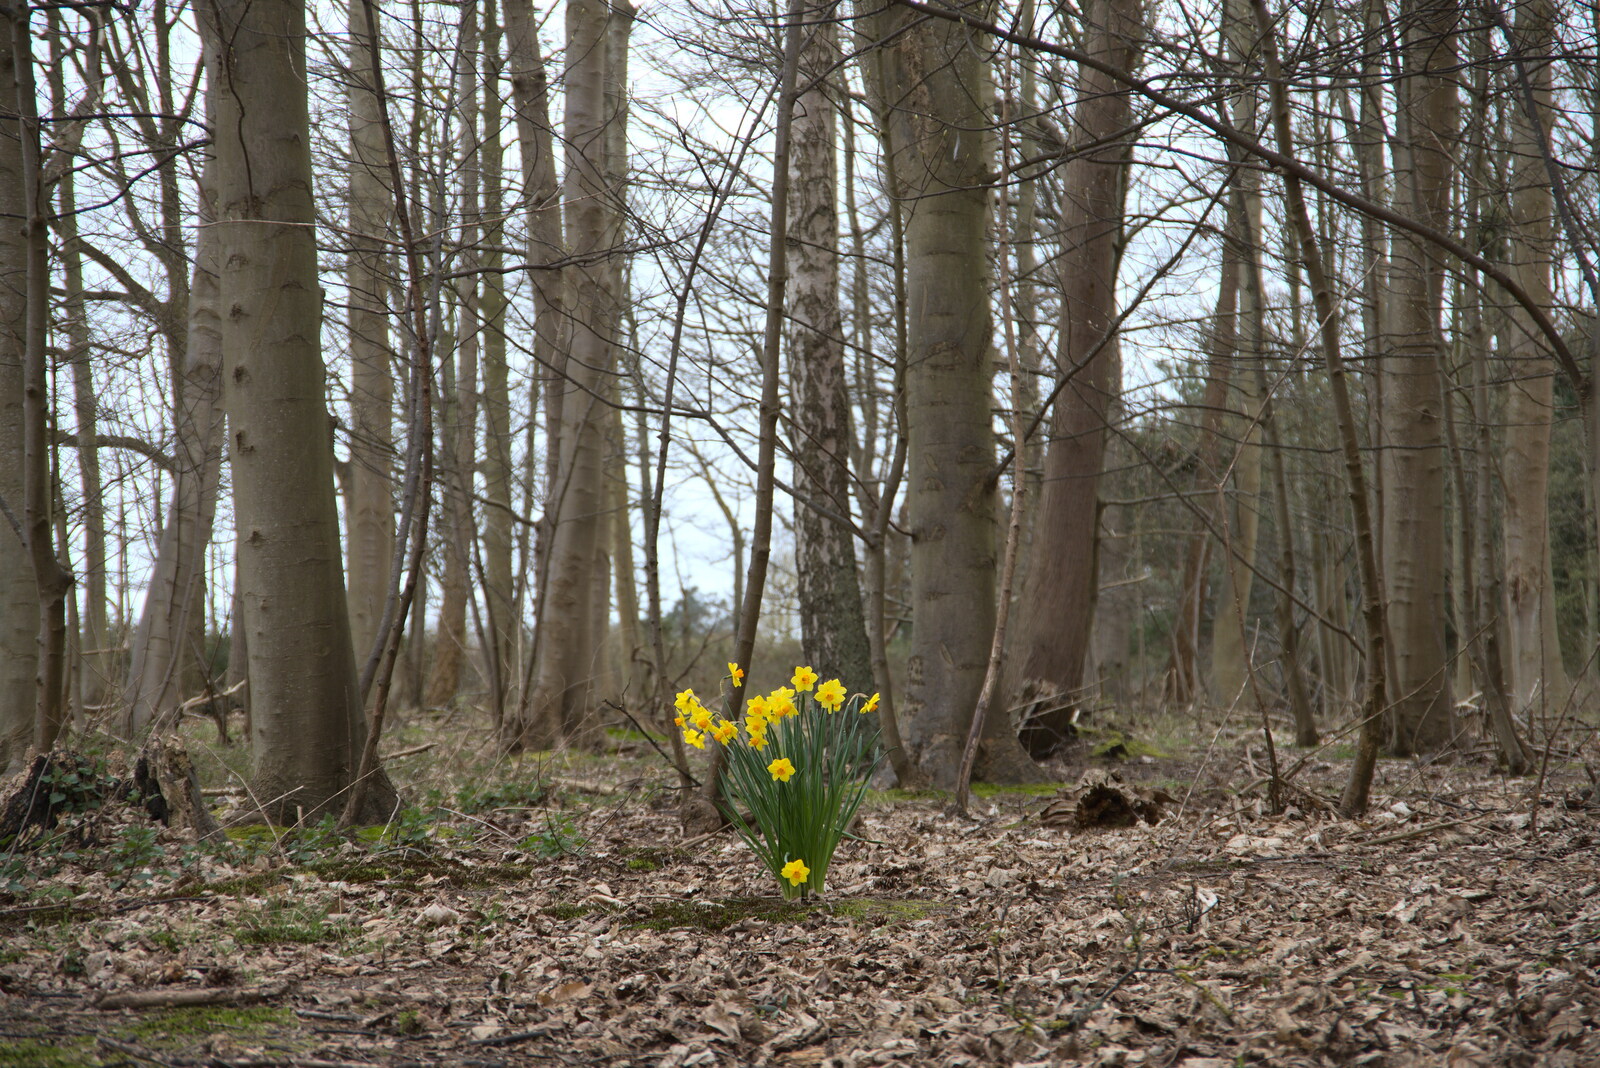 A solitary bunch of daffodils in the woods from A Trip to Dunwich Beach, Dunwich, Suffolk - 2nd April 2021